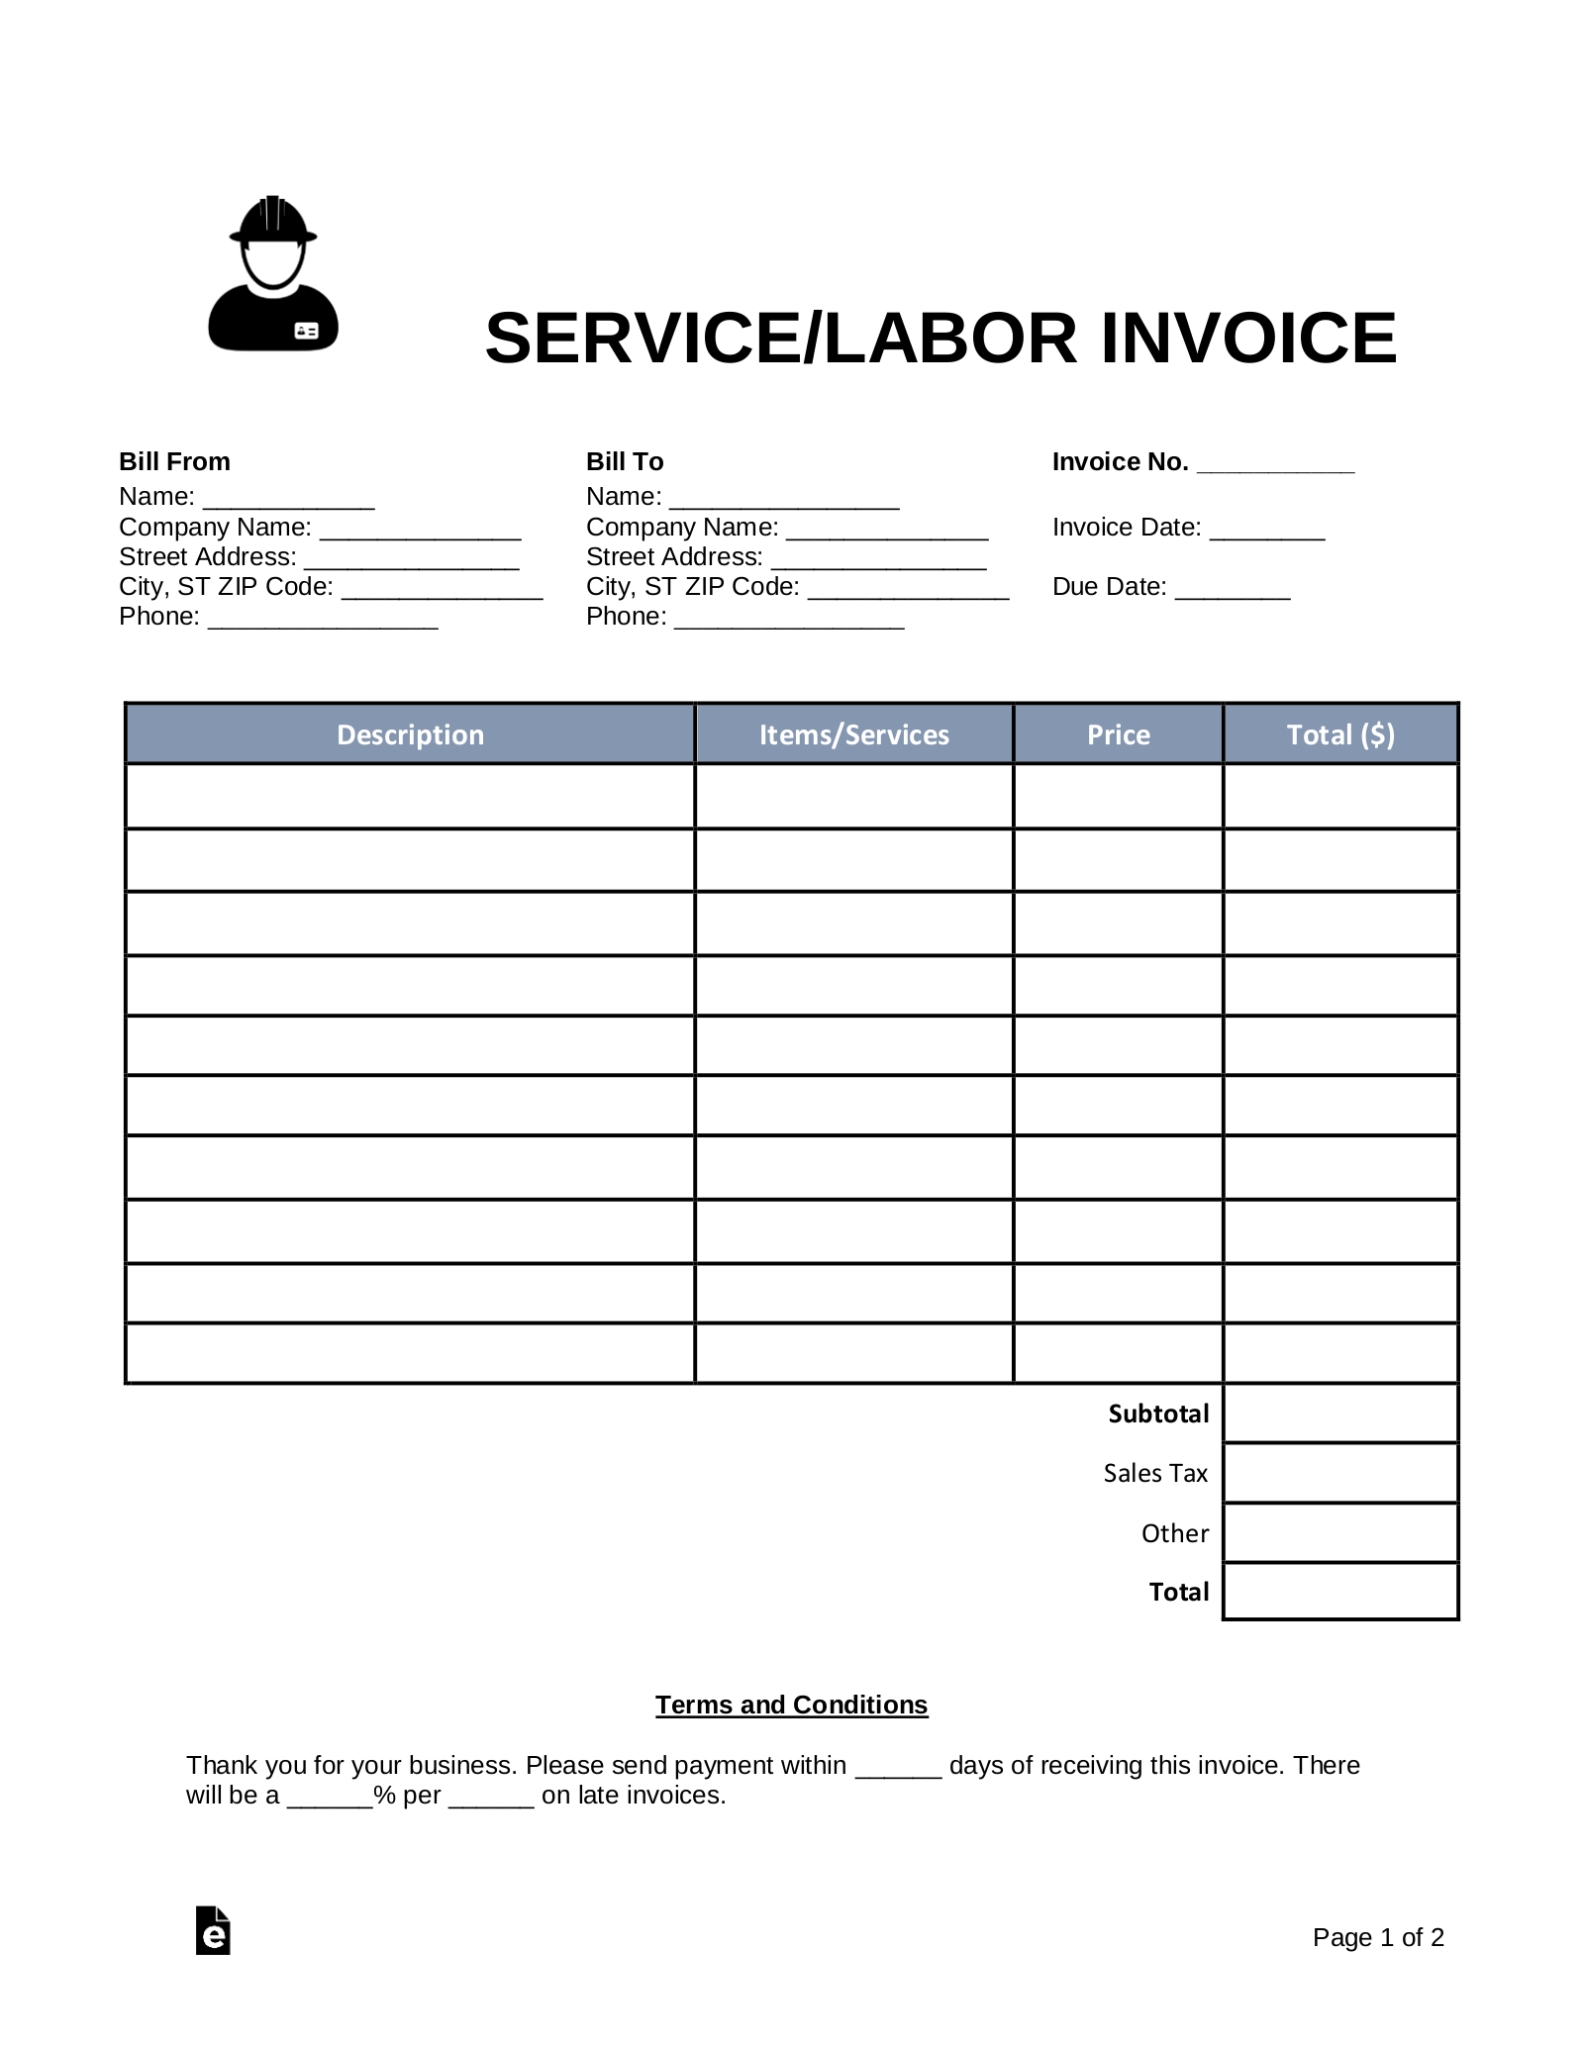 Free Service/Labor Invoice Template – Word | Pdf – Eforms Within Invoice For Work Done Template